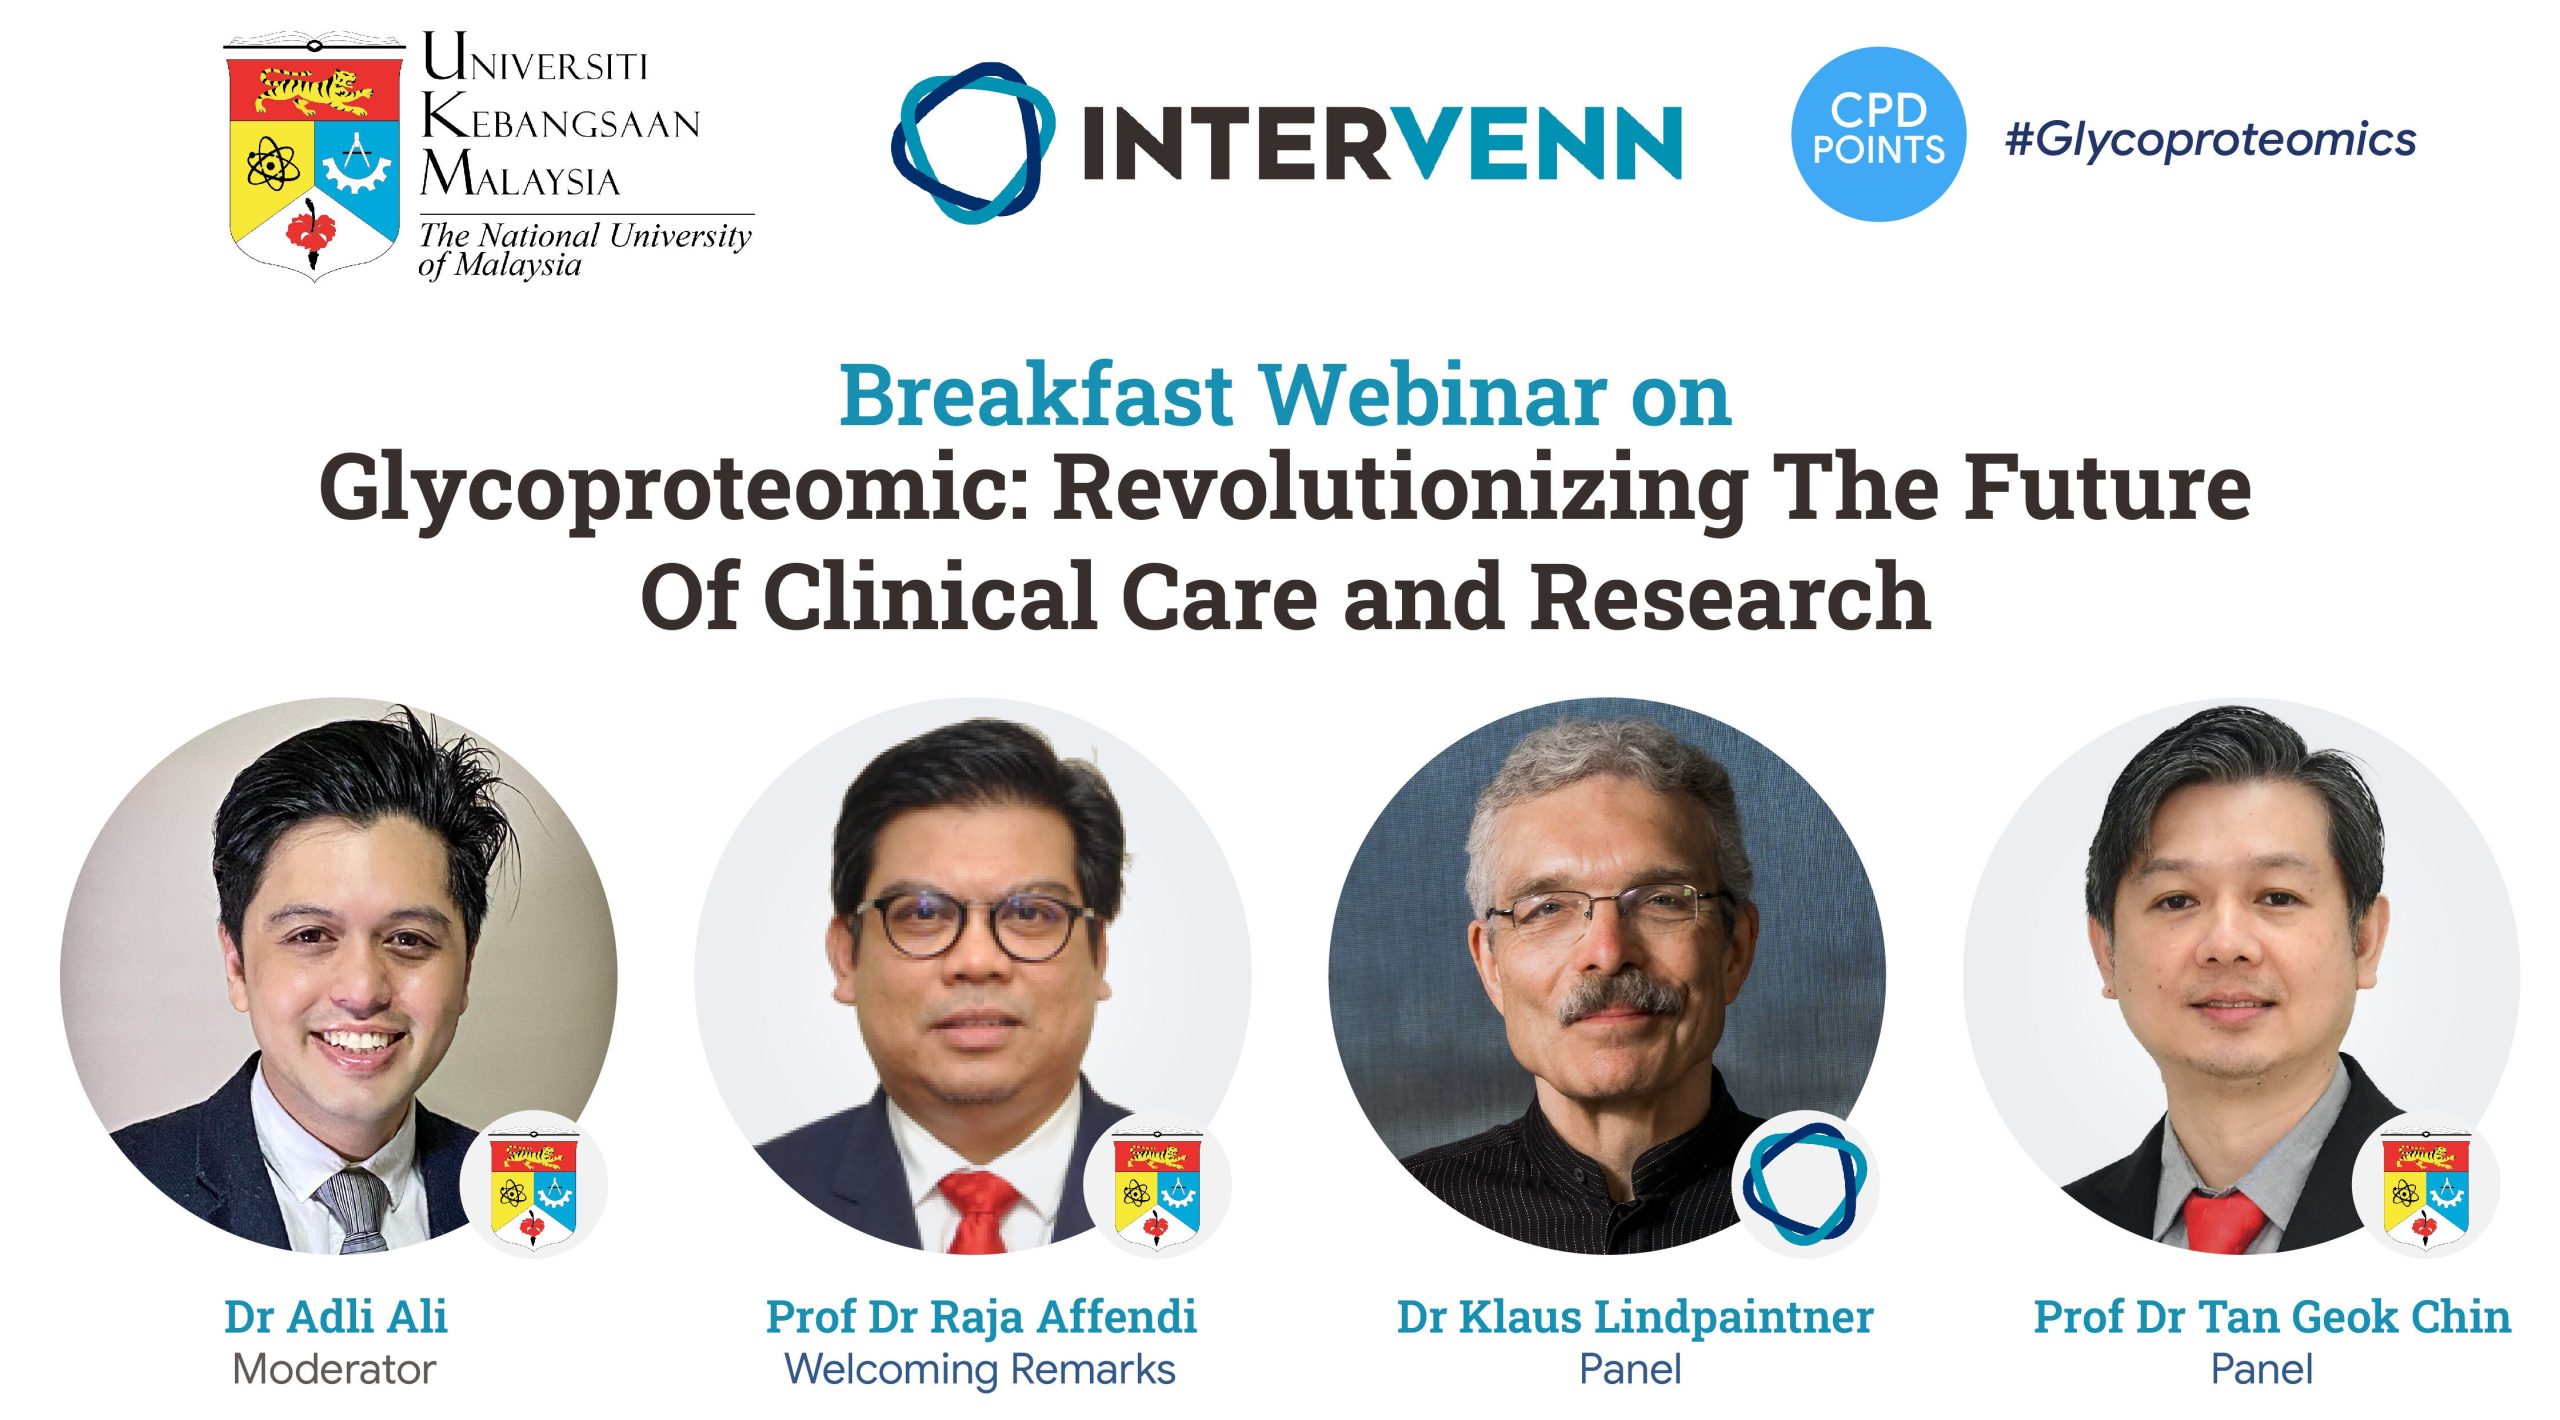 Breakfast Webinar on Glycoproteomic: Revolutionizing The Future of Clinical Care and ResearchBreakfast Webinar on Glycoproteomic: Revolutionizing The Future of Clinical Care and Research